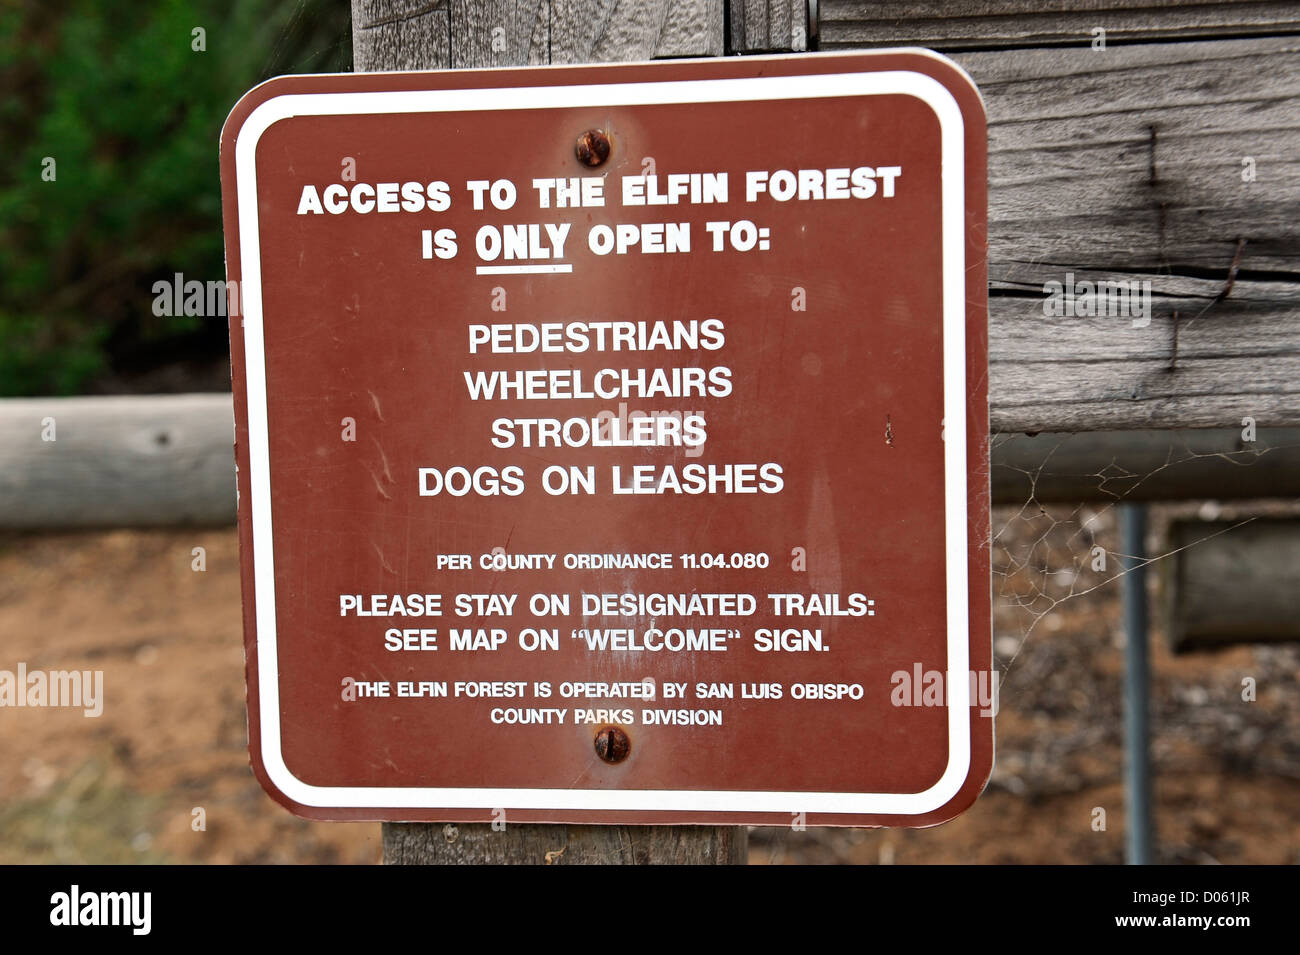 Access sign for the Elfin Forest Stock Photo